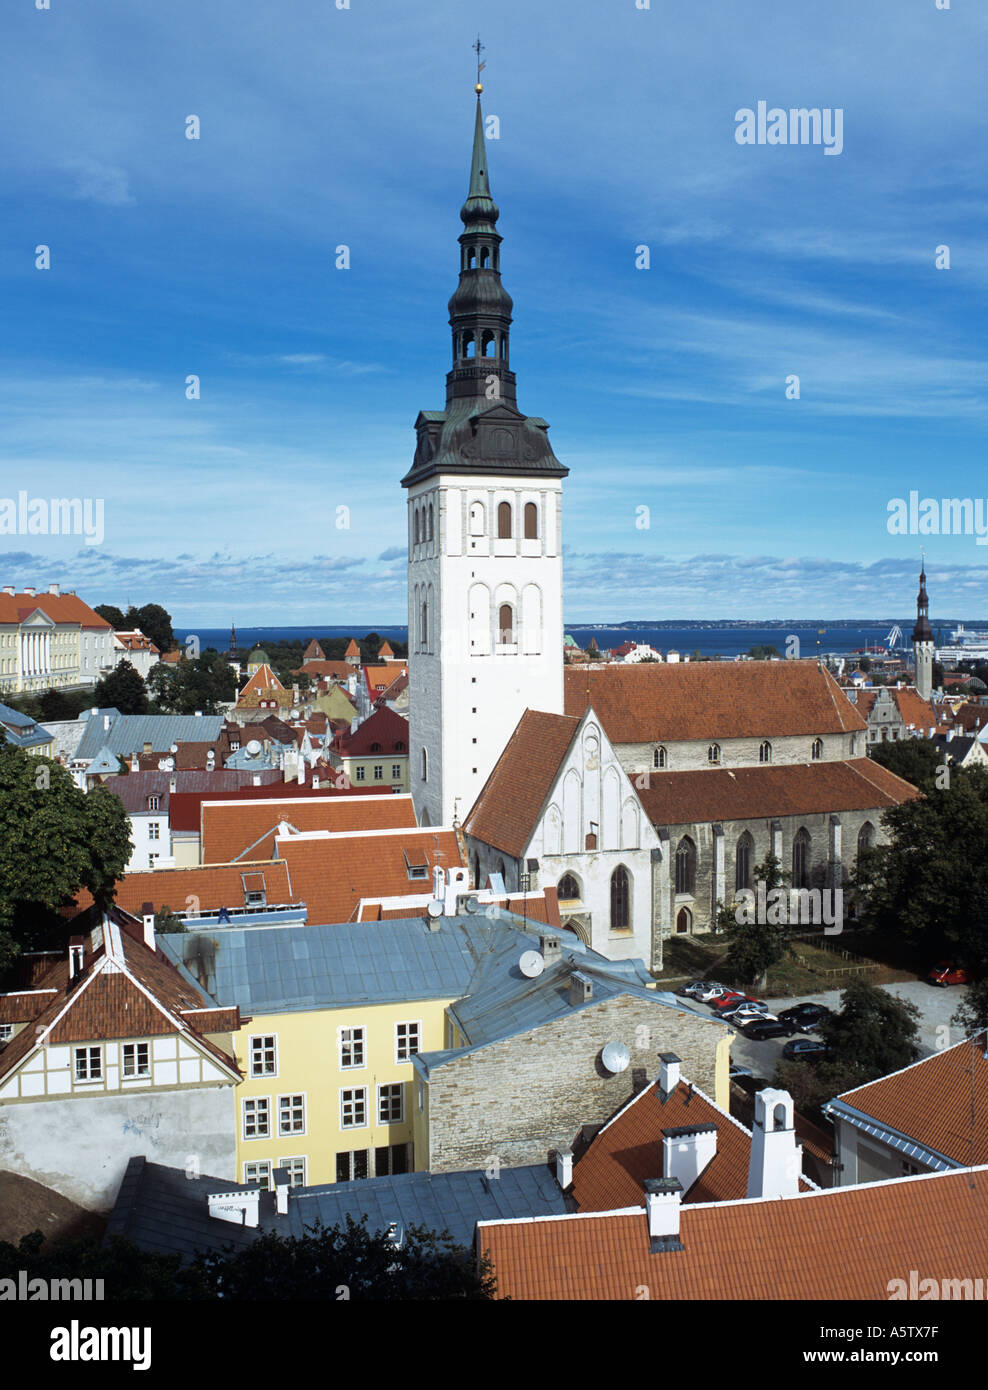 Tallinn Old Town Republic of Estonia Europe. ST NICHOLAS S CHURCH and ROOFTOPS of the Lower town Stock Photo